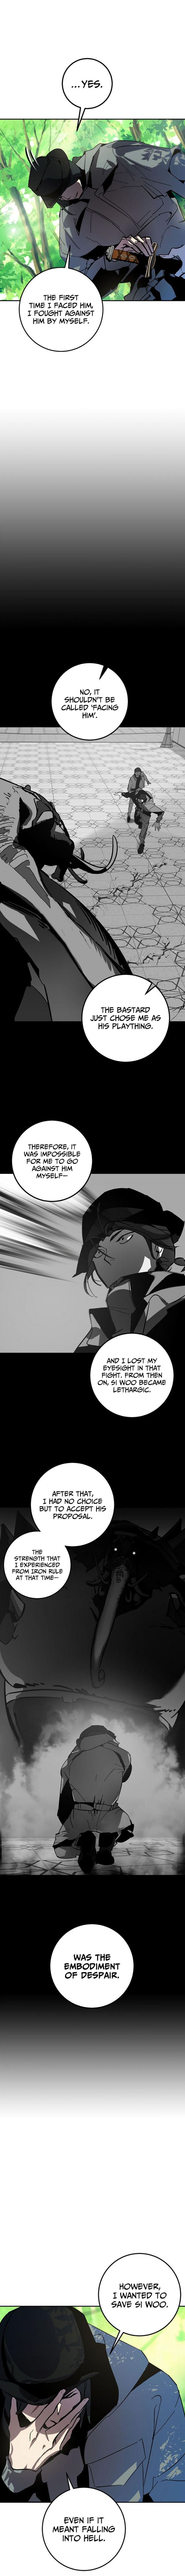 return-to-player-chap-32-7